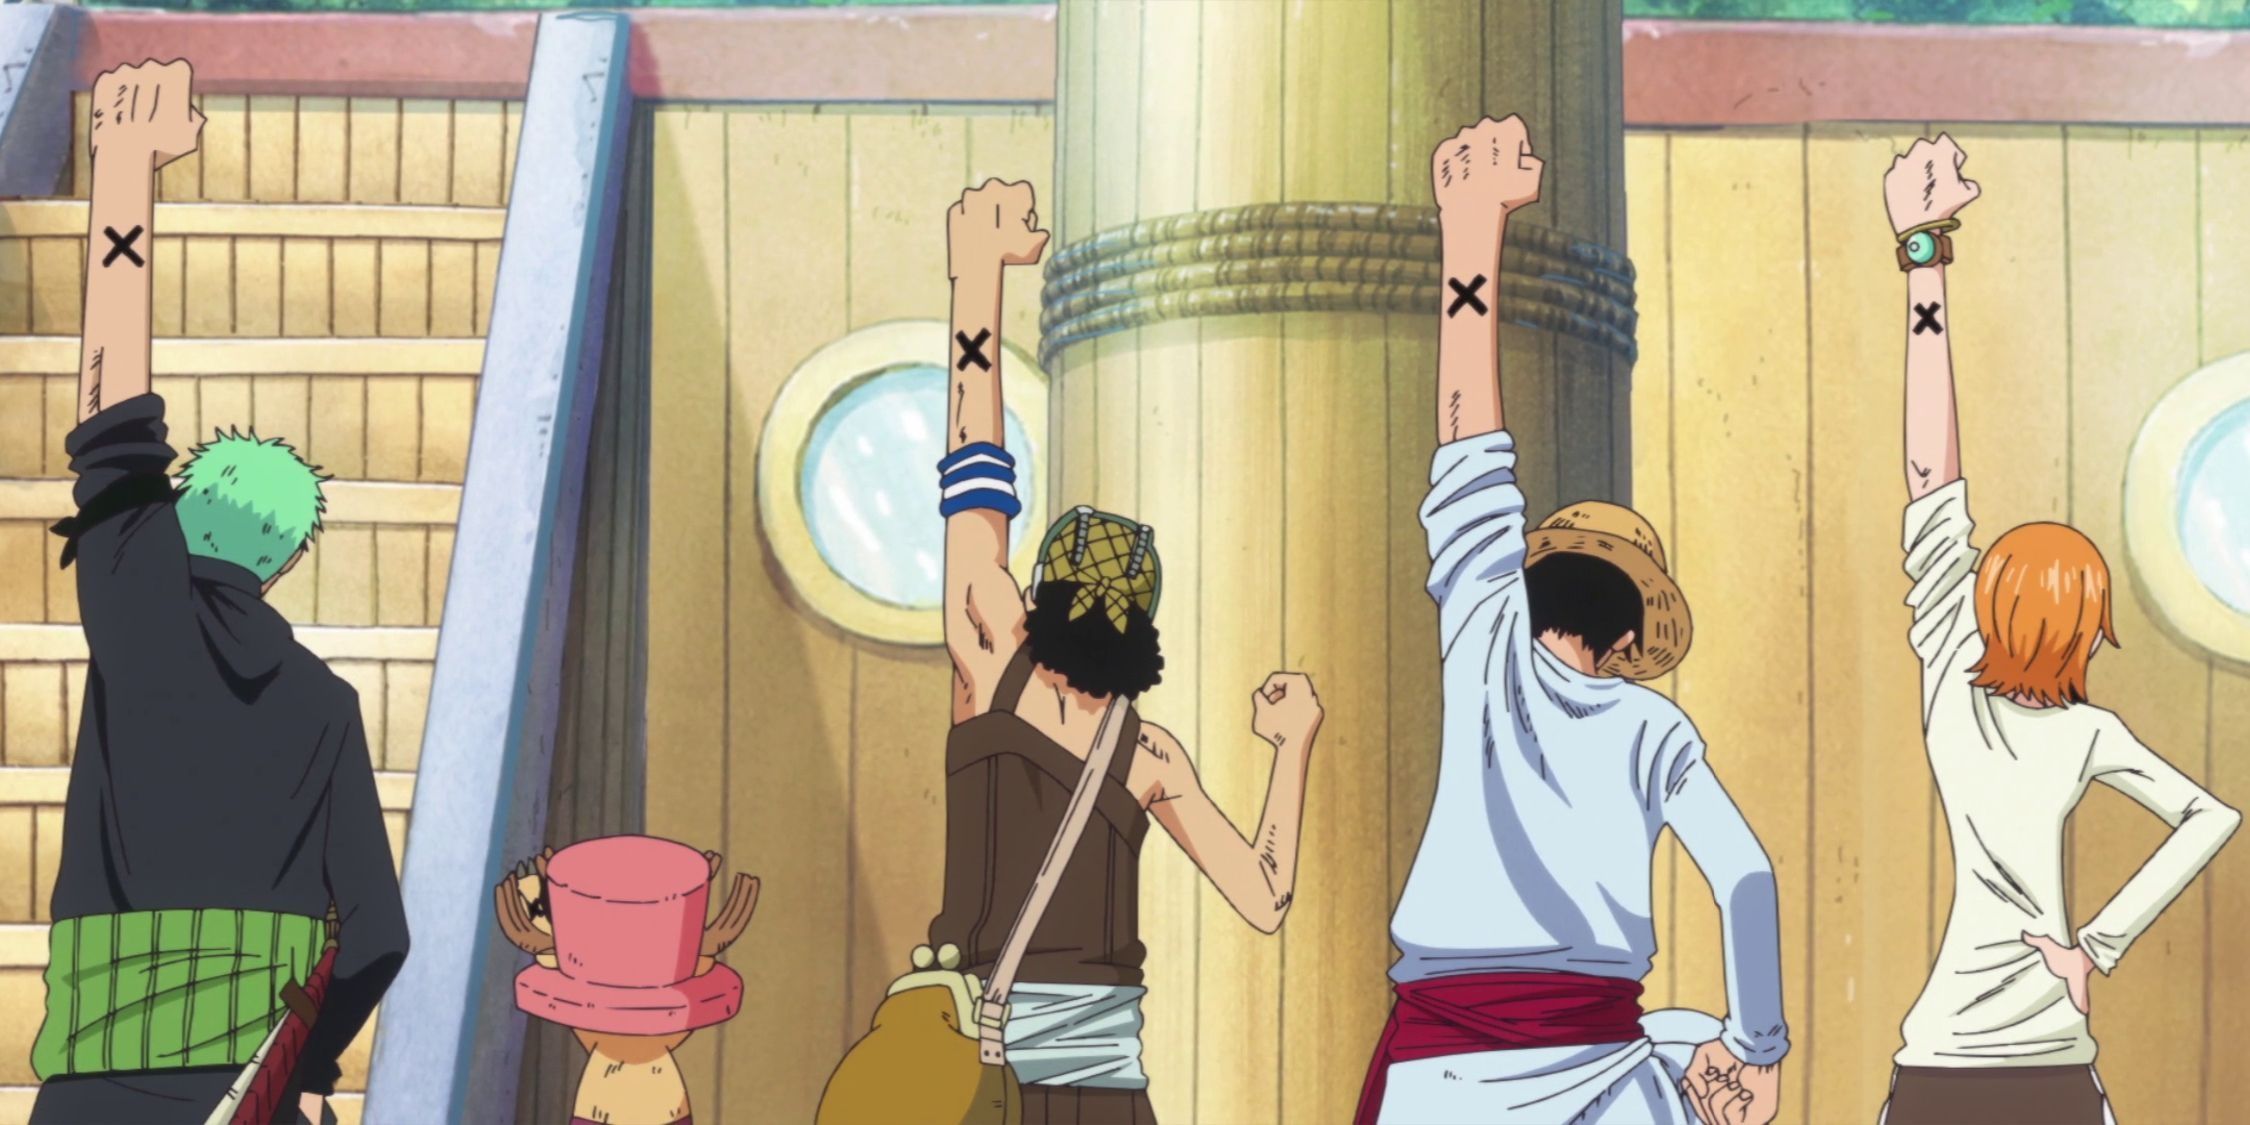 The Straw Hat Pirates pumping their fists in the air aboard their vessel